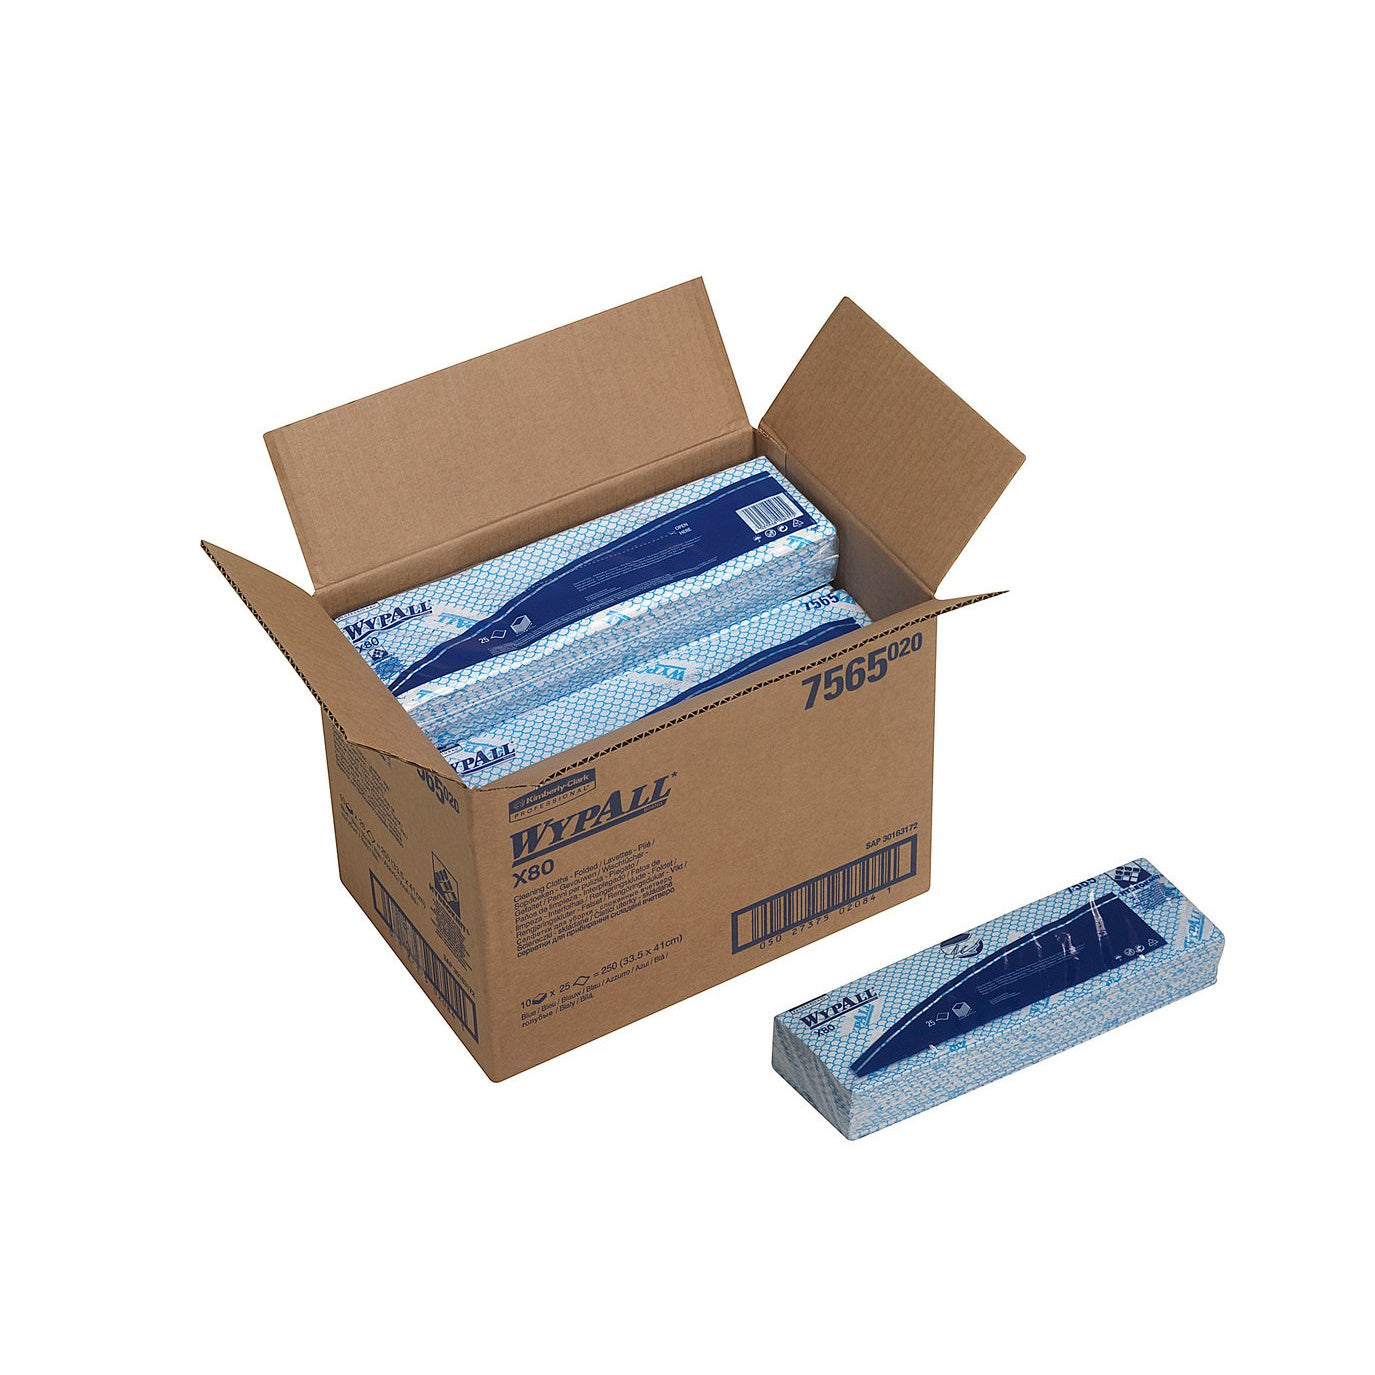 WypAll X80 Cleaning Cloths - Interfolded / Blue (10 Packs of 25) - Code 7565